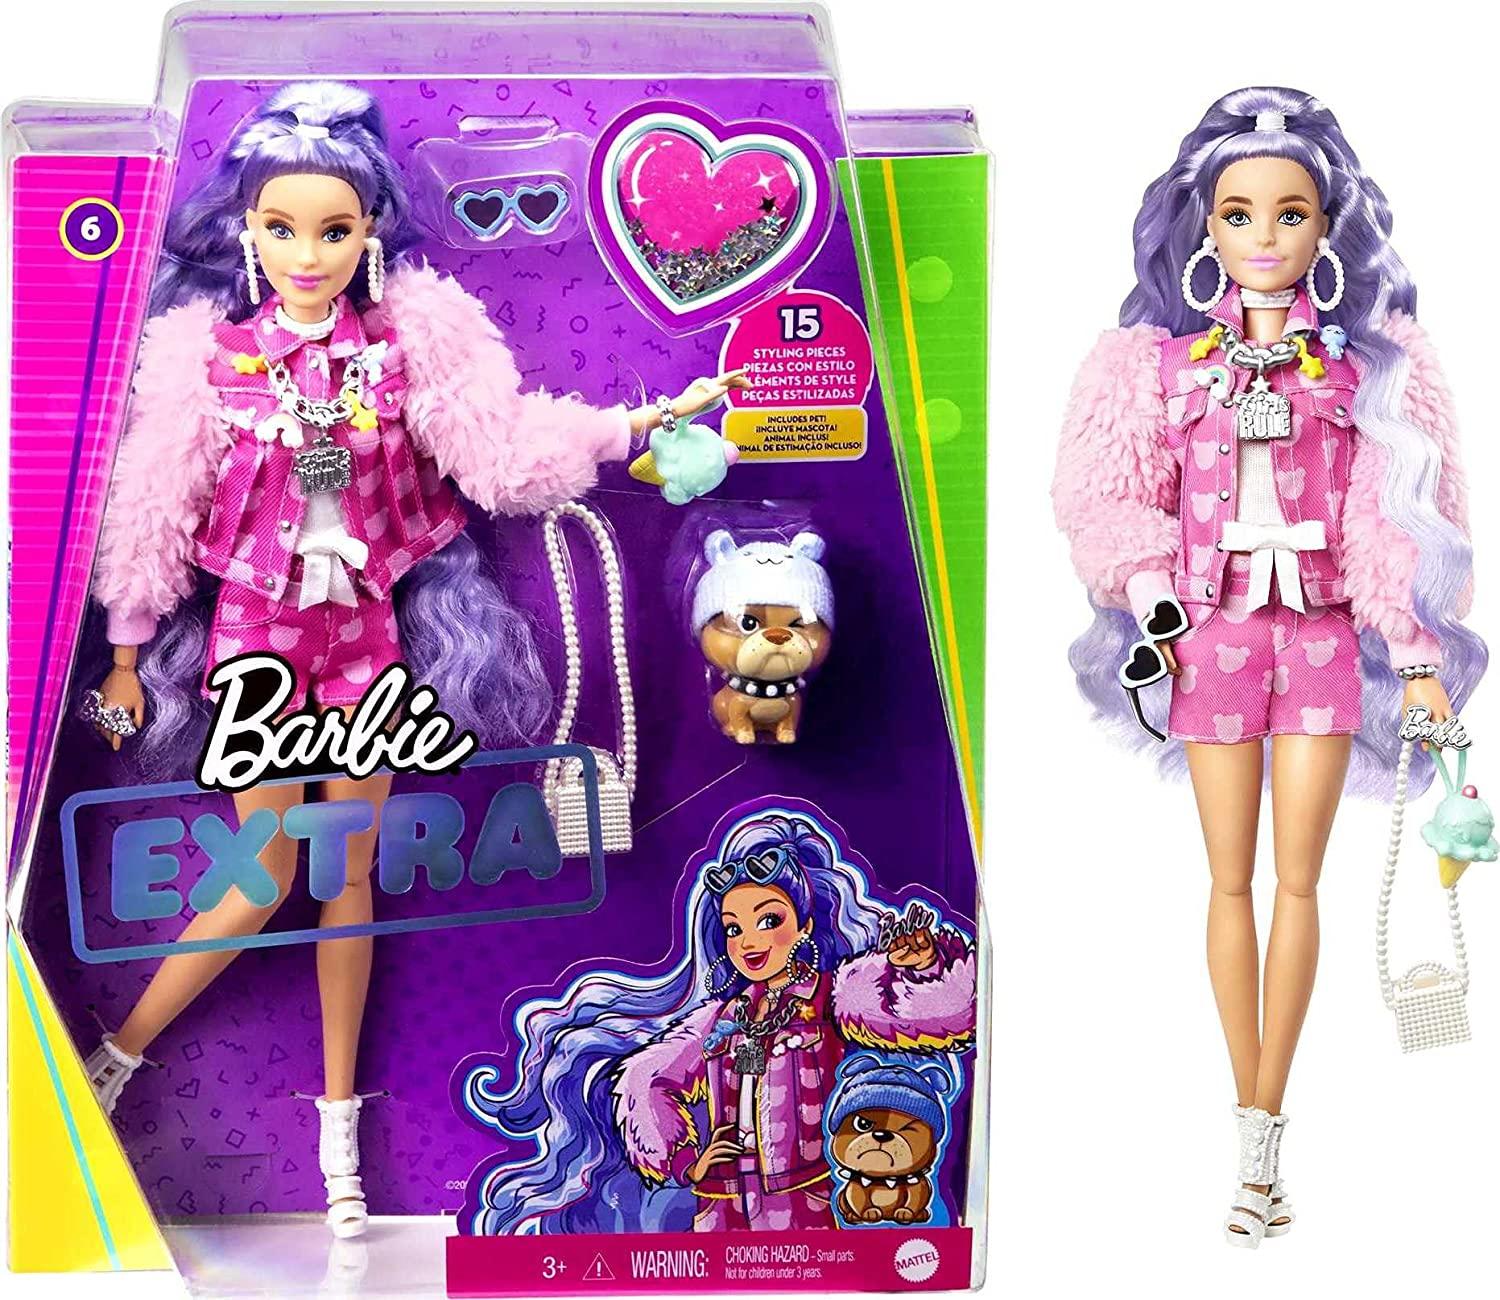  Barbie Extra Doll #8 in Pink Sparkly Varsity Jacket with Furry  Arms & Pet Teddy Bear, Extra-Long Crimped Pigtails, Layered Outfit &  Accessories, Multiple Flexible Joints, For Kids 3 Years Old